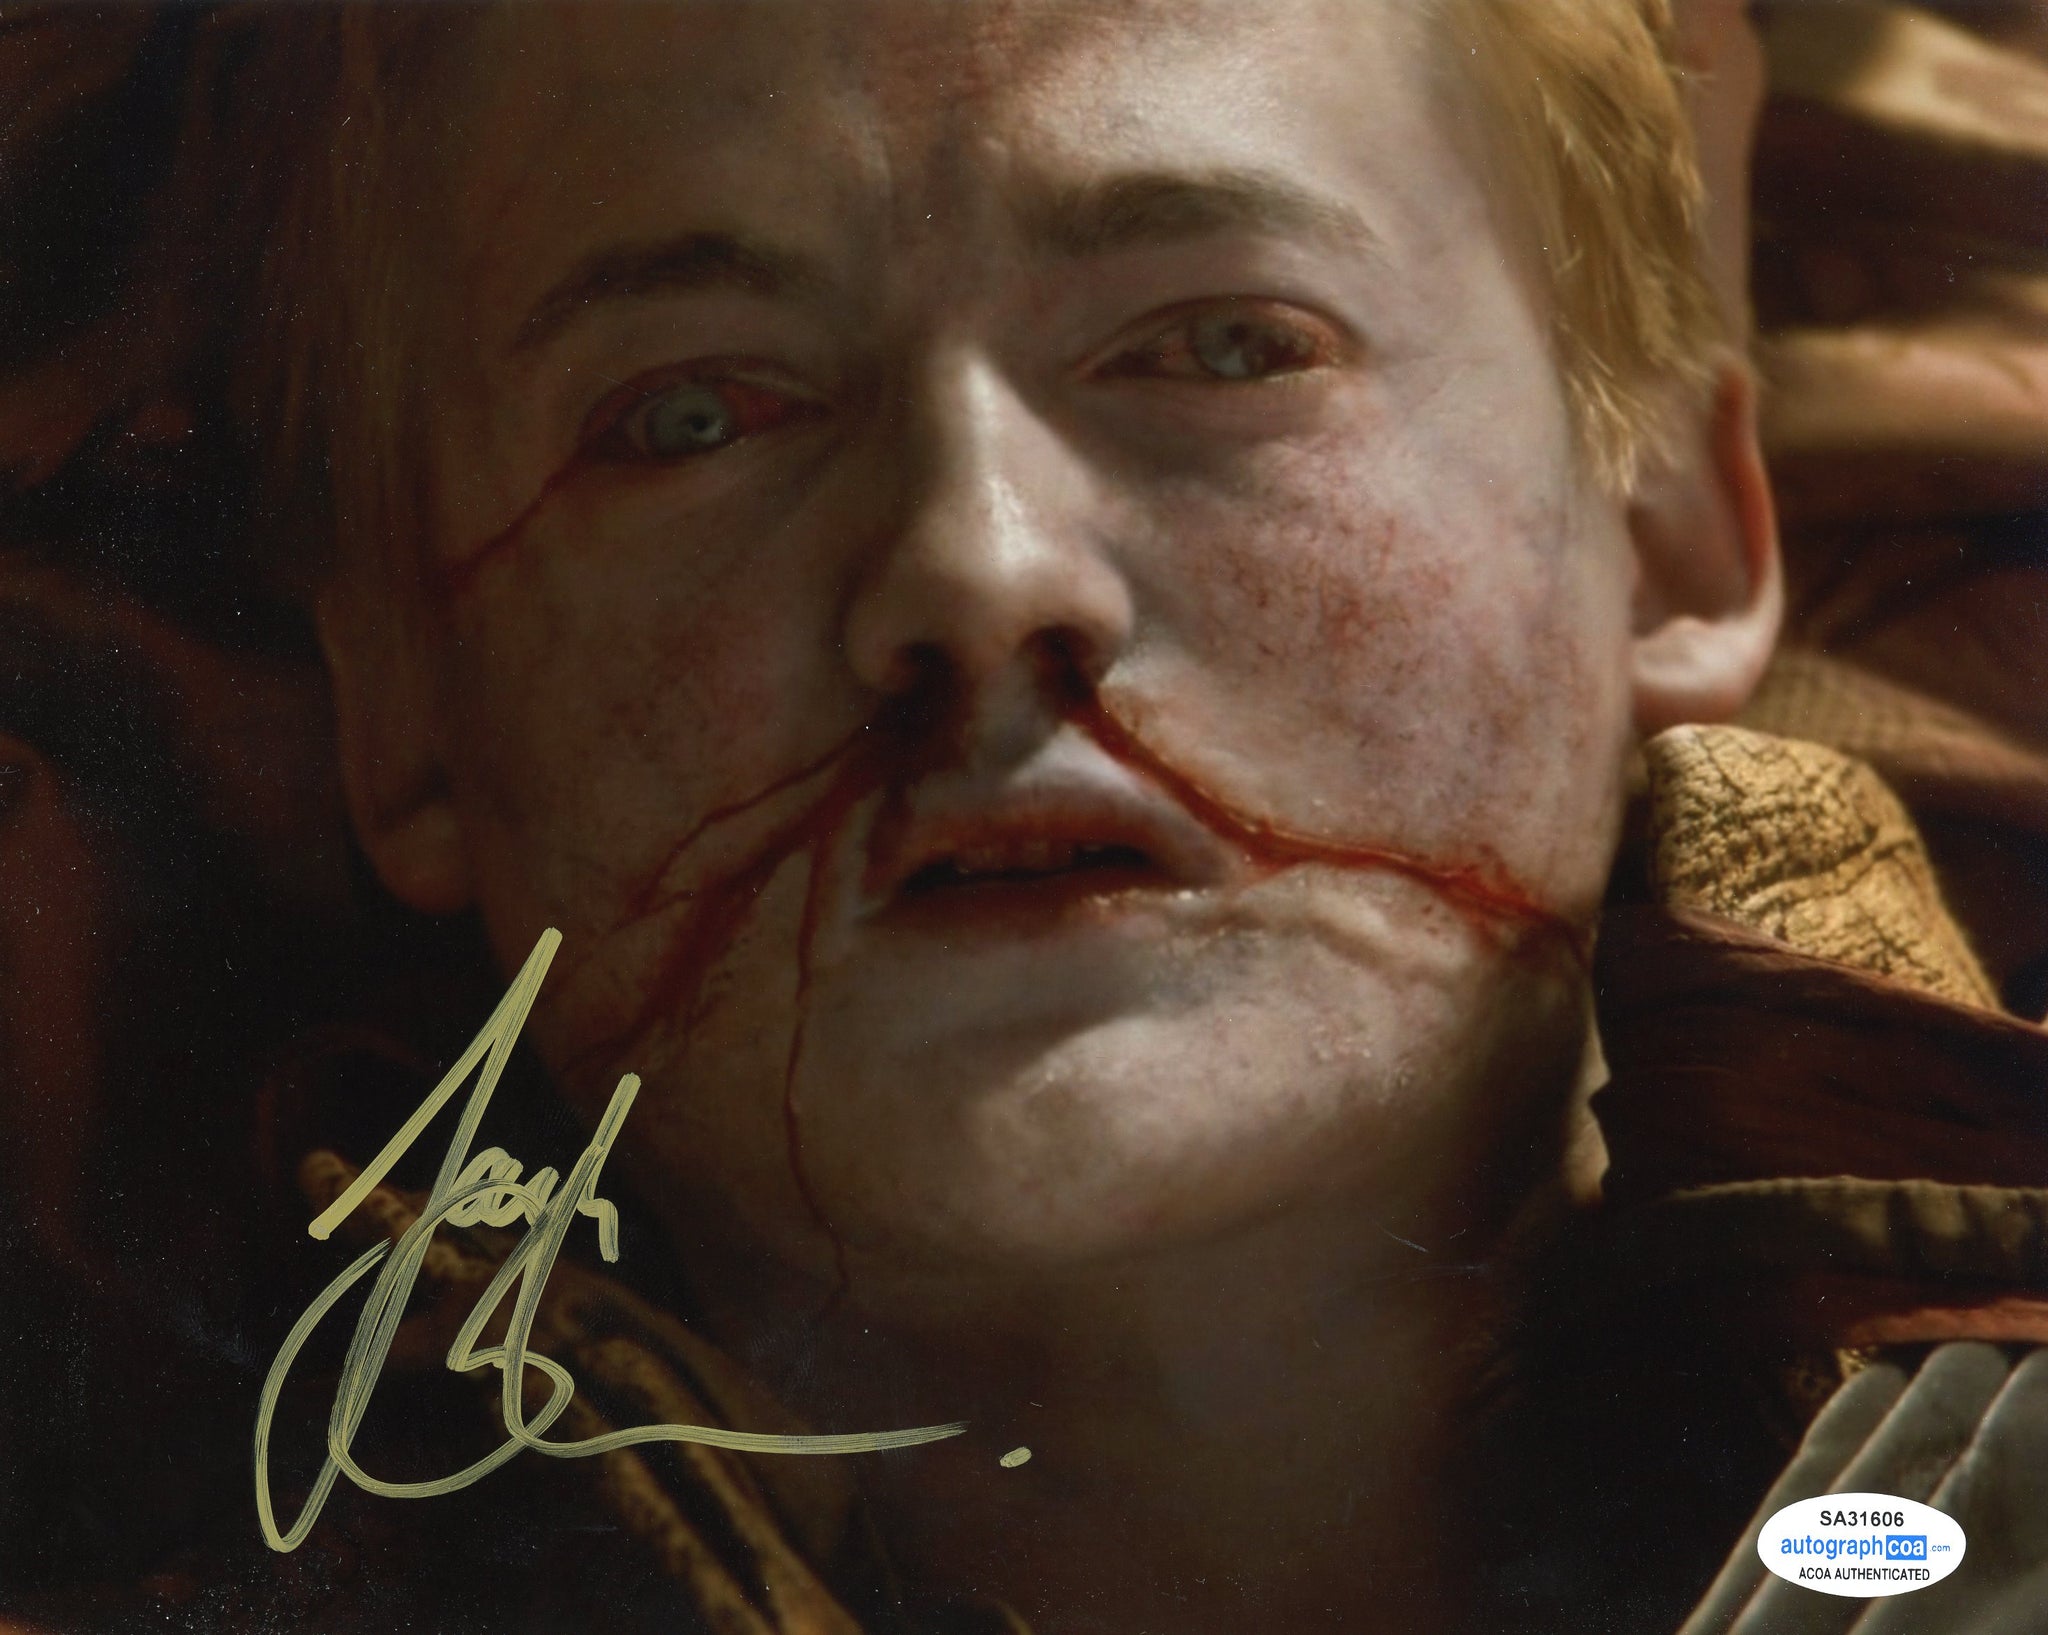 Jack Gleeson Game of Thrones Signed Autograph 8x10 Photo #14 - Outlaw Hobbies Authentic Autographs